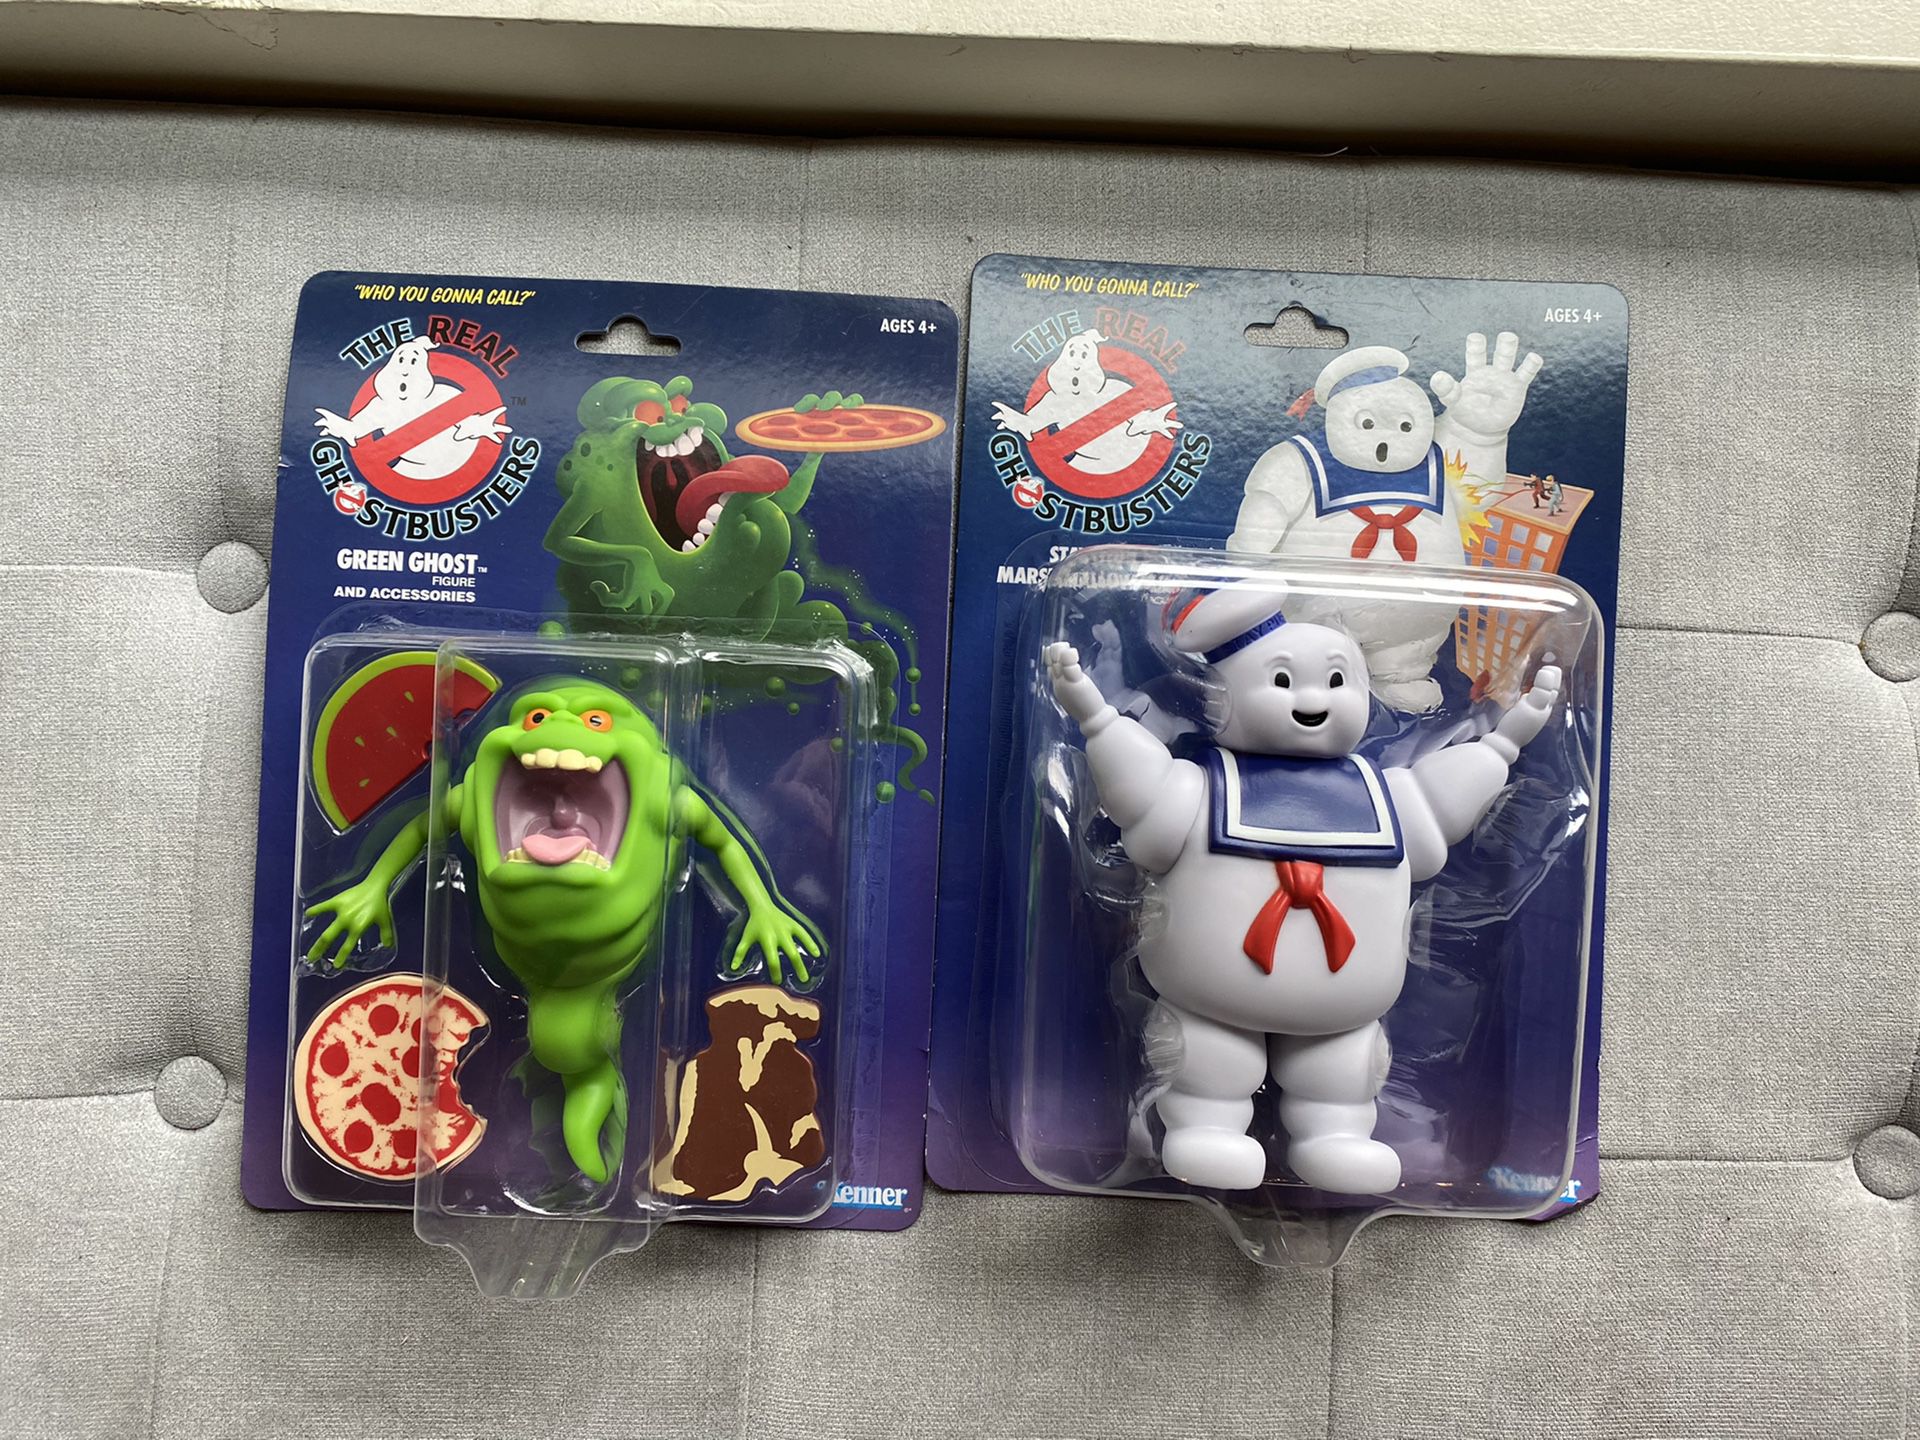 Real Ghostbusters 2020 Slimer & Stay Puft Marshmallow Man Action Figure Lot MOC